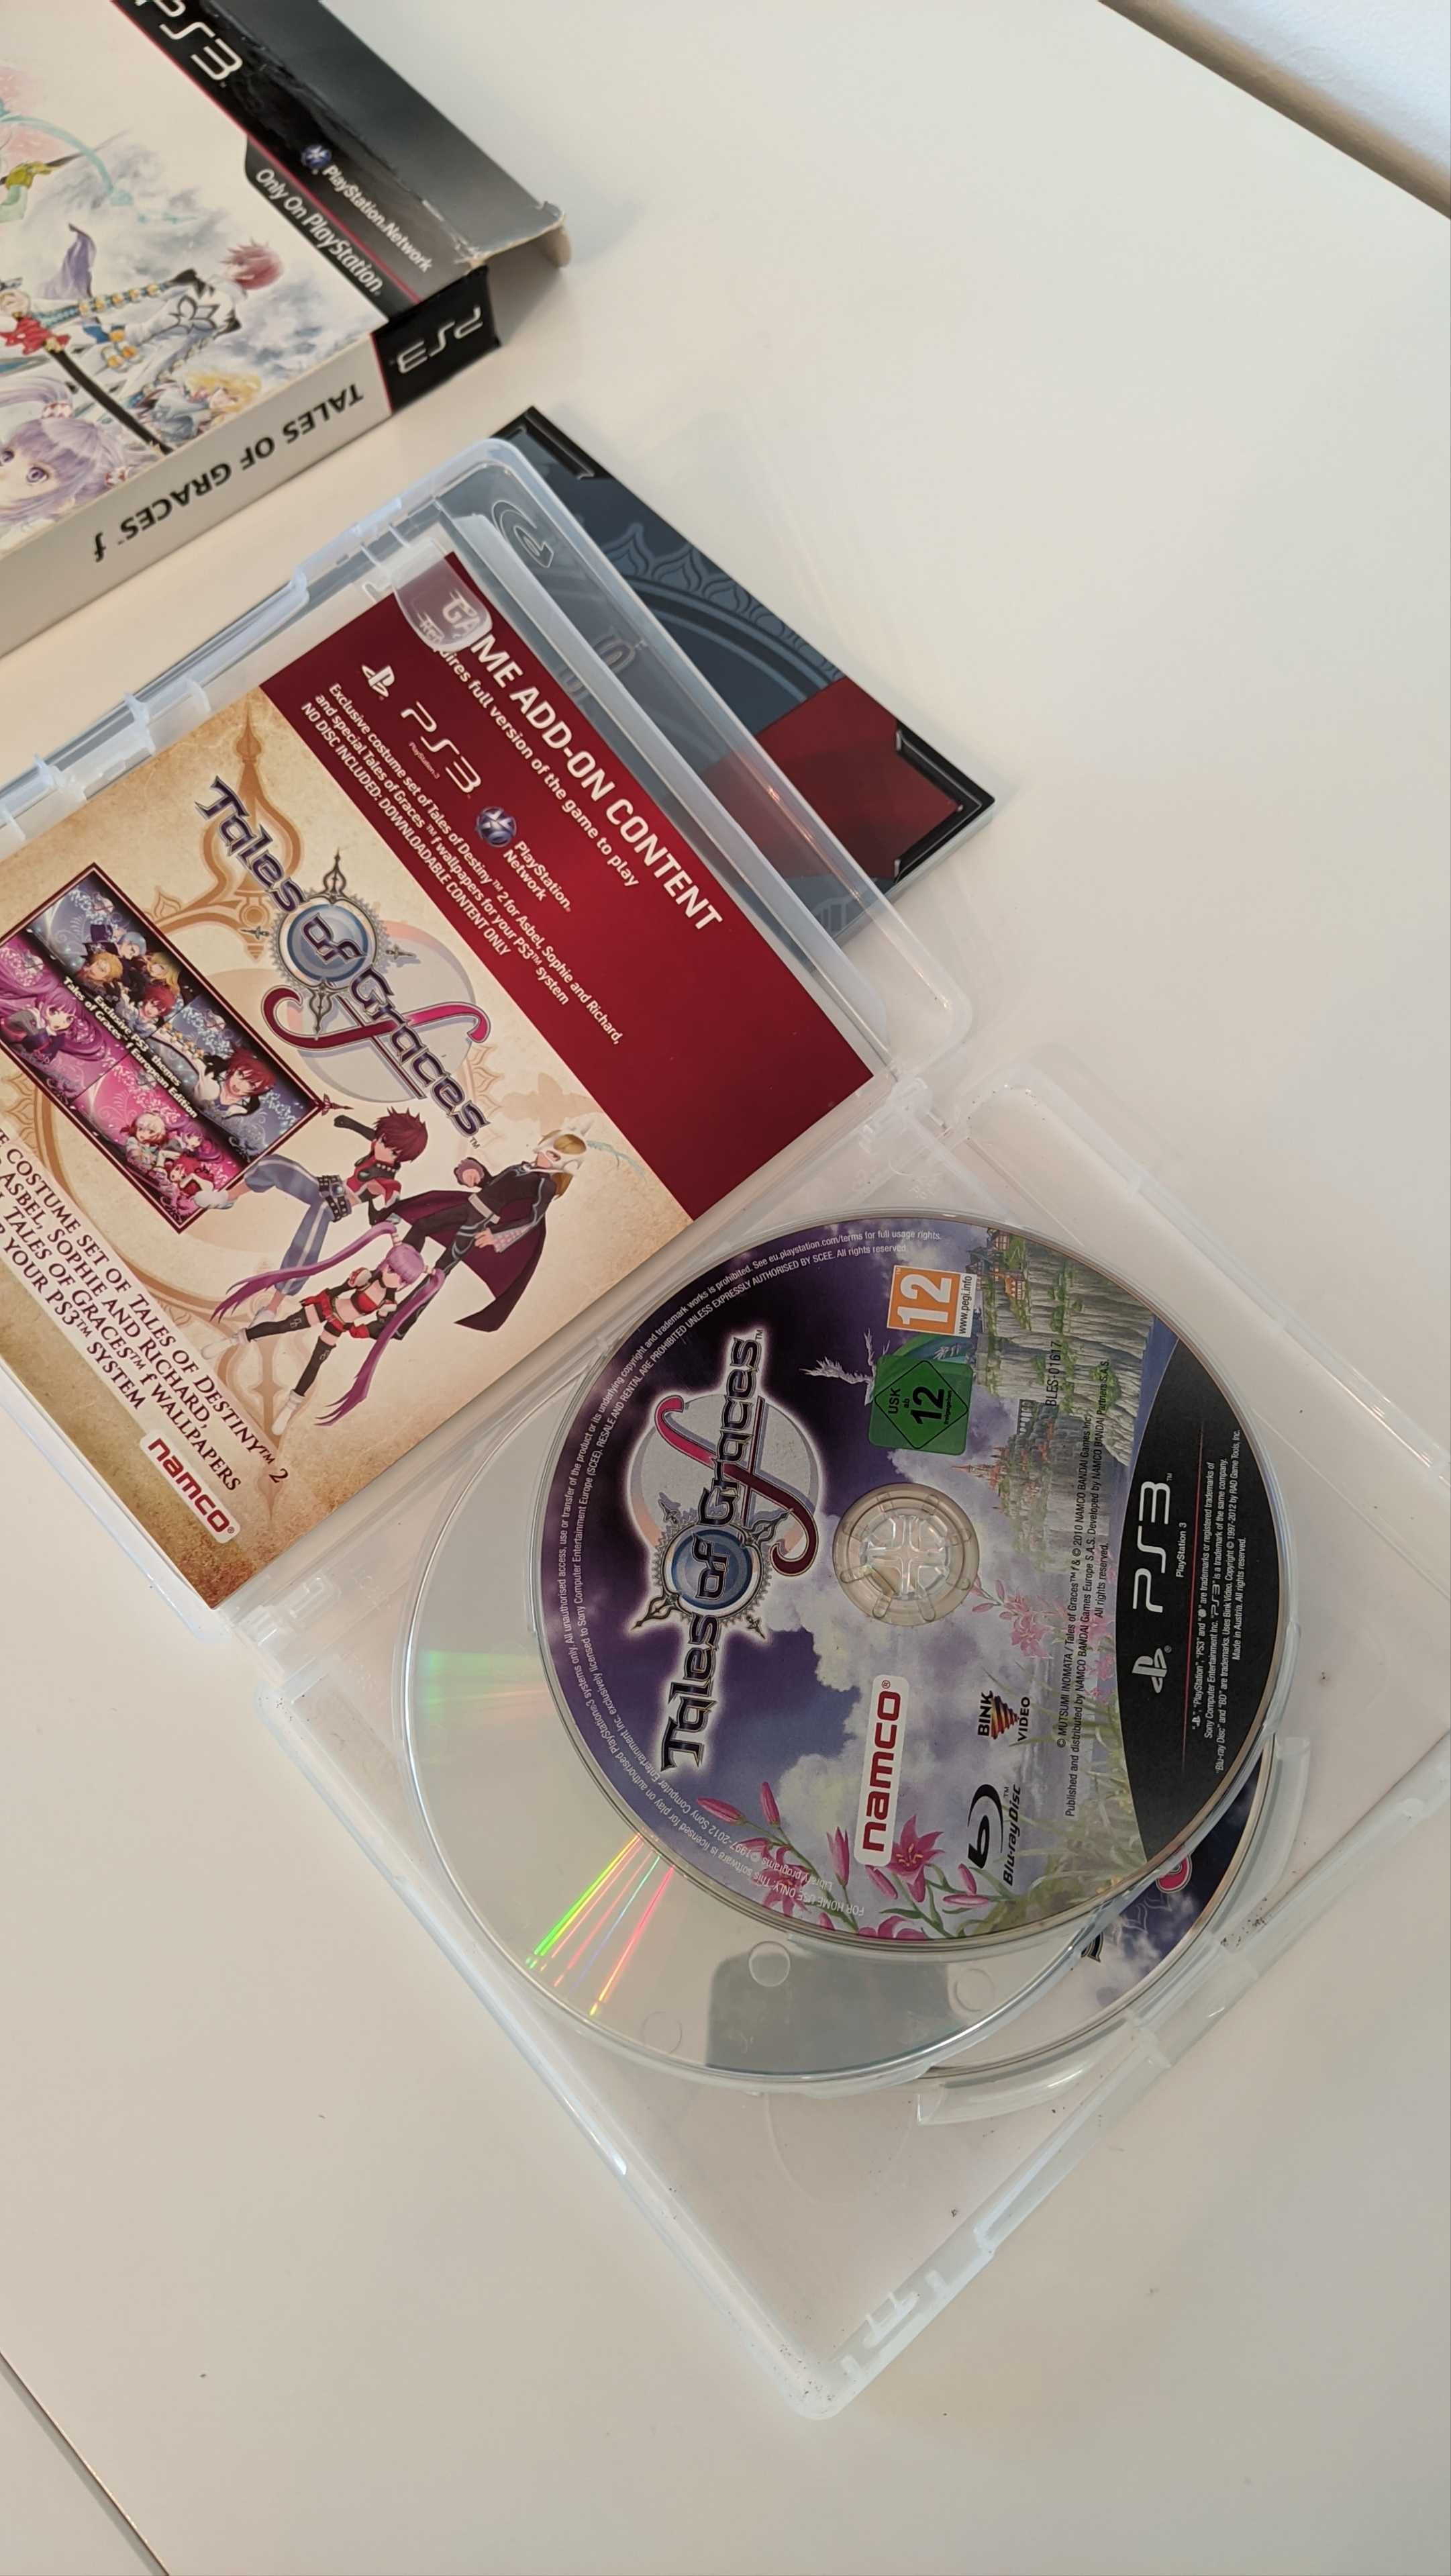 Tales of Graces - Day One Edition (PS3)